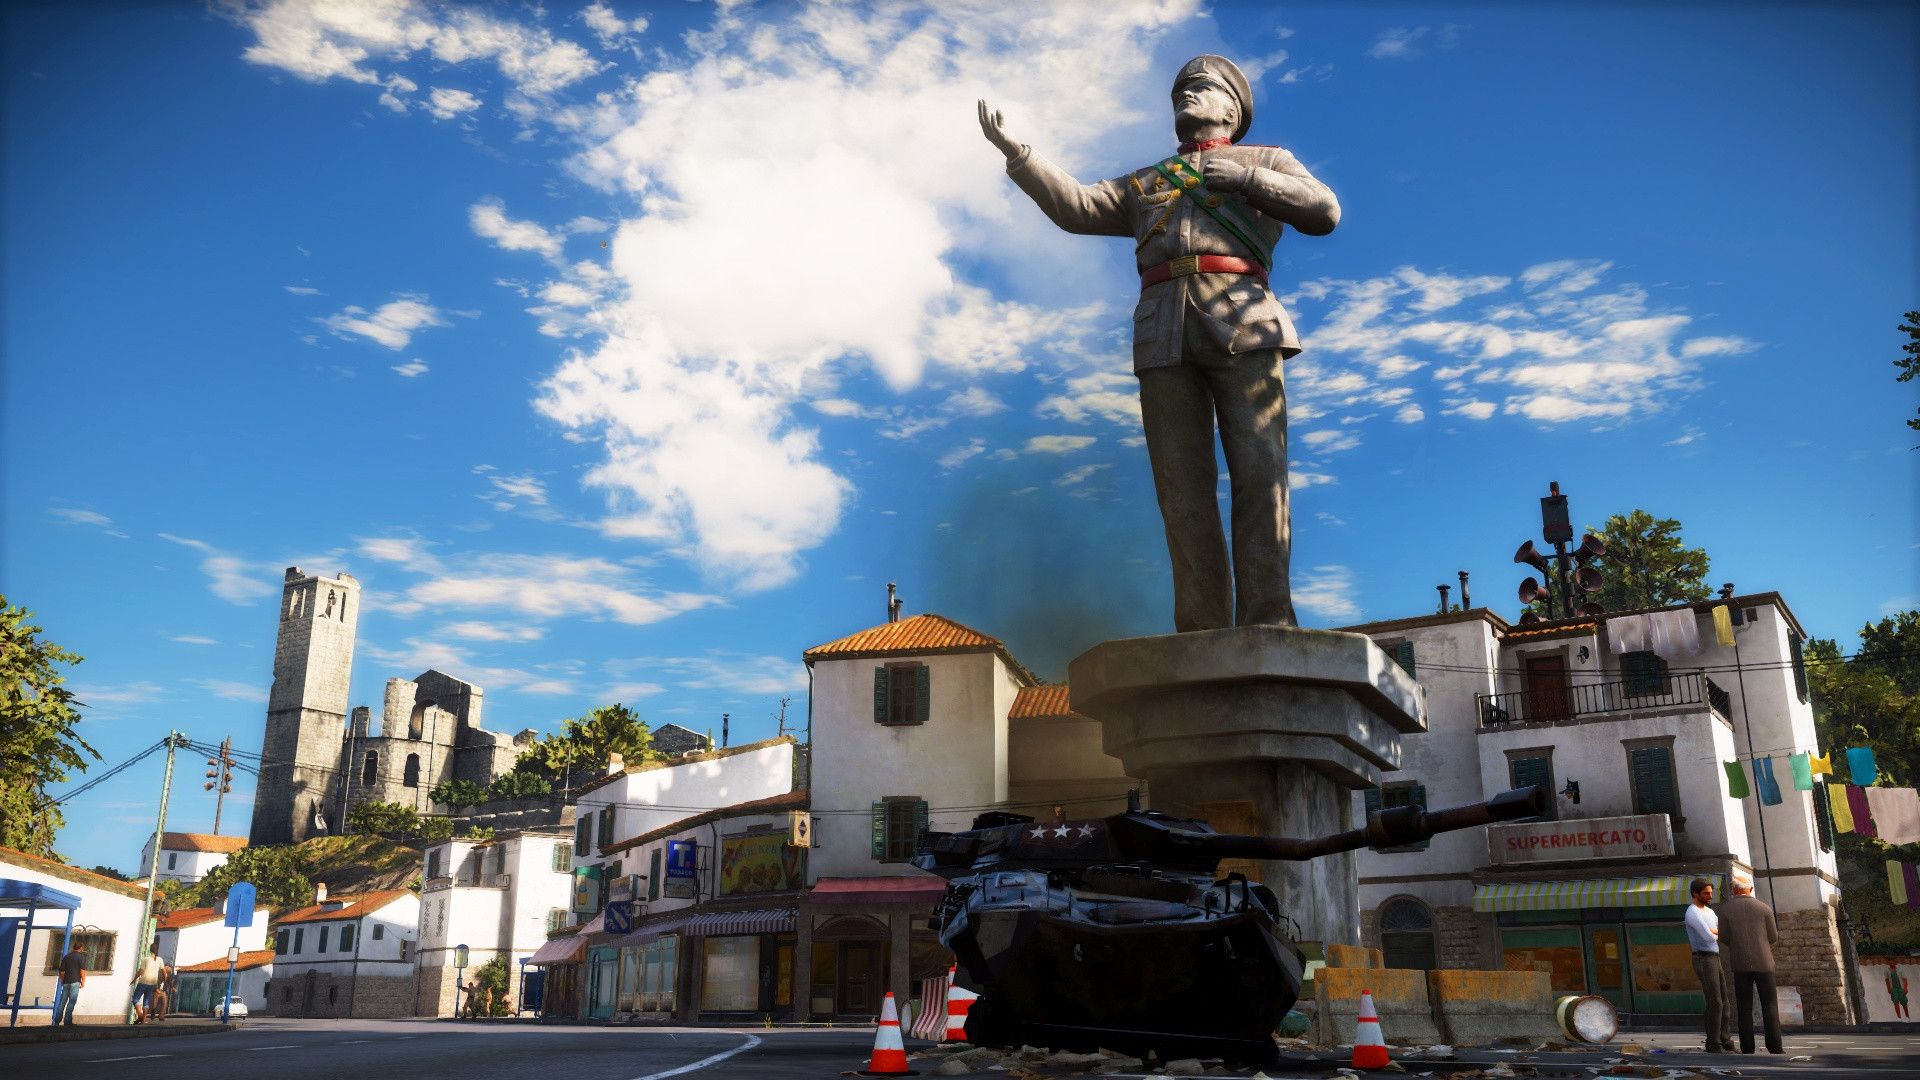 Just_Cause_3_statue_and_armored_vehicle.